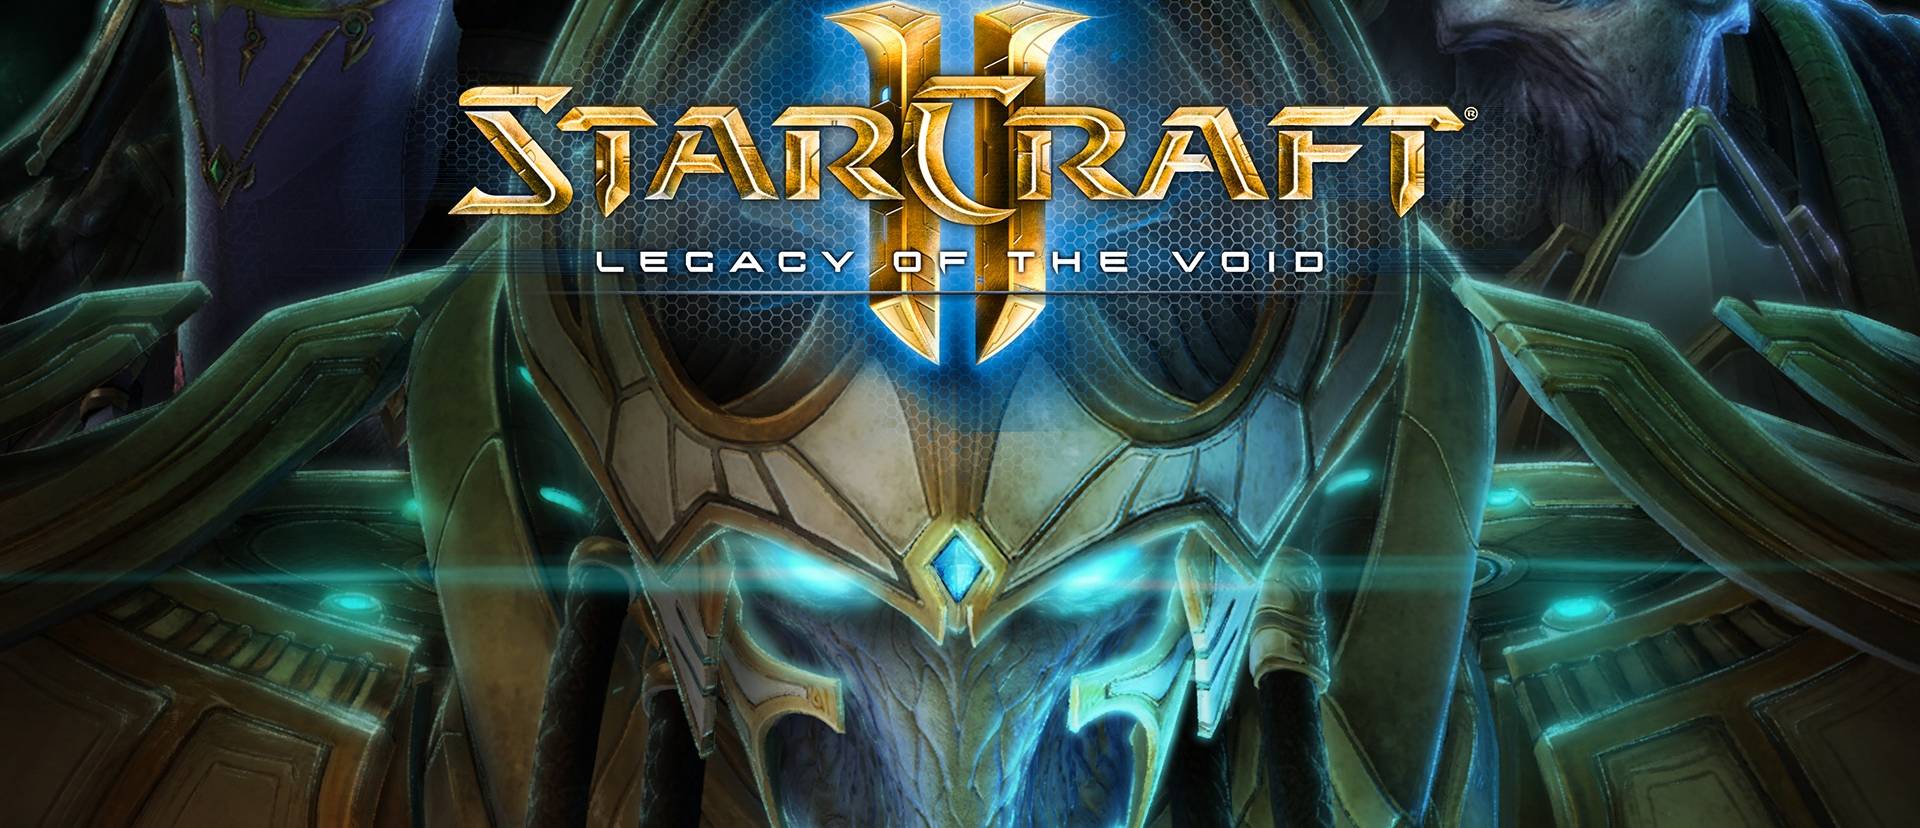 StarCraft: Legacy of the Void nyitófilm